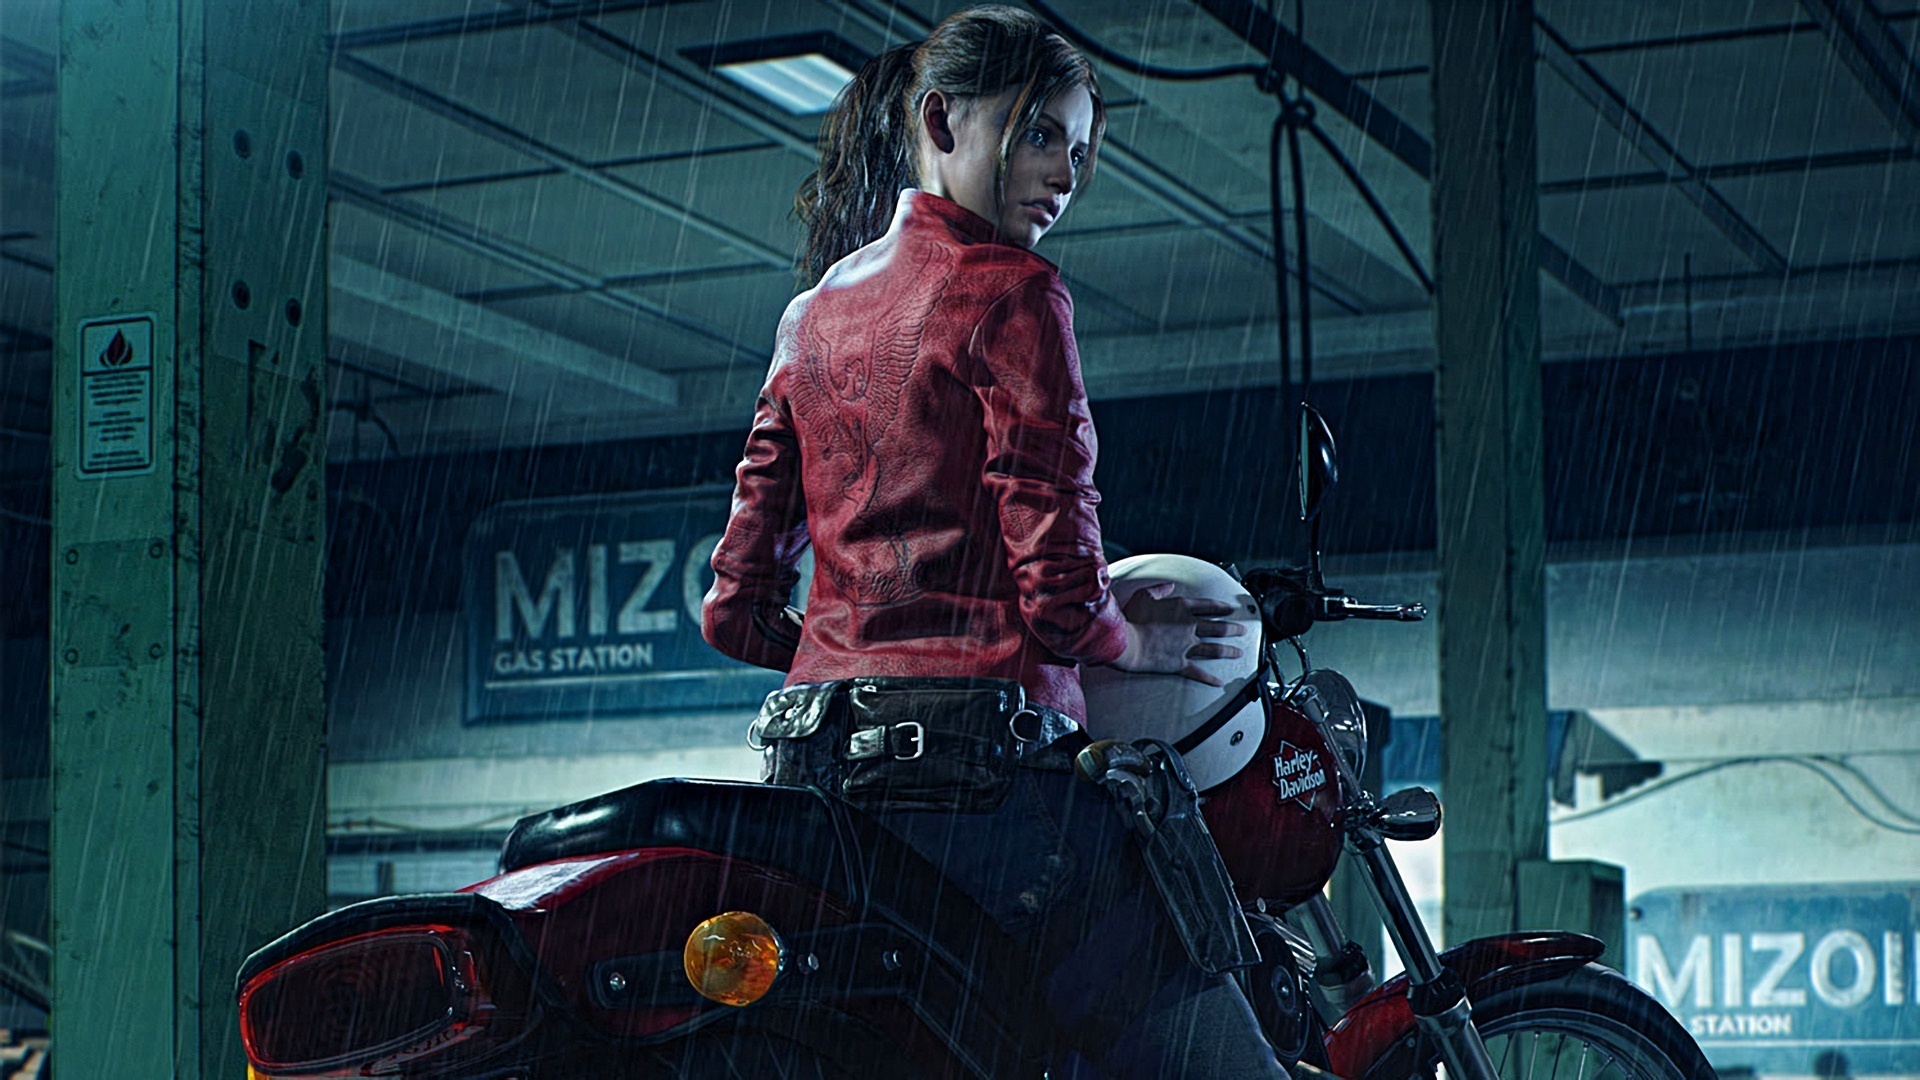 resident evil, 2 2019, claire redfield, harley davidson